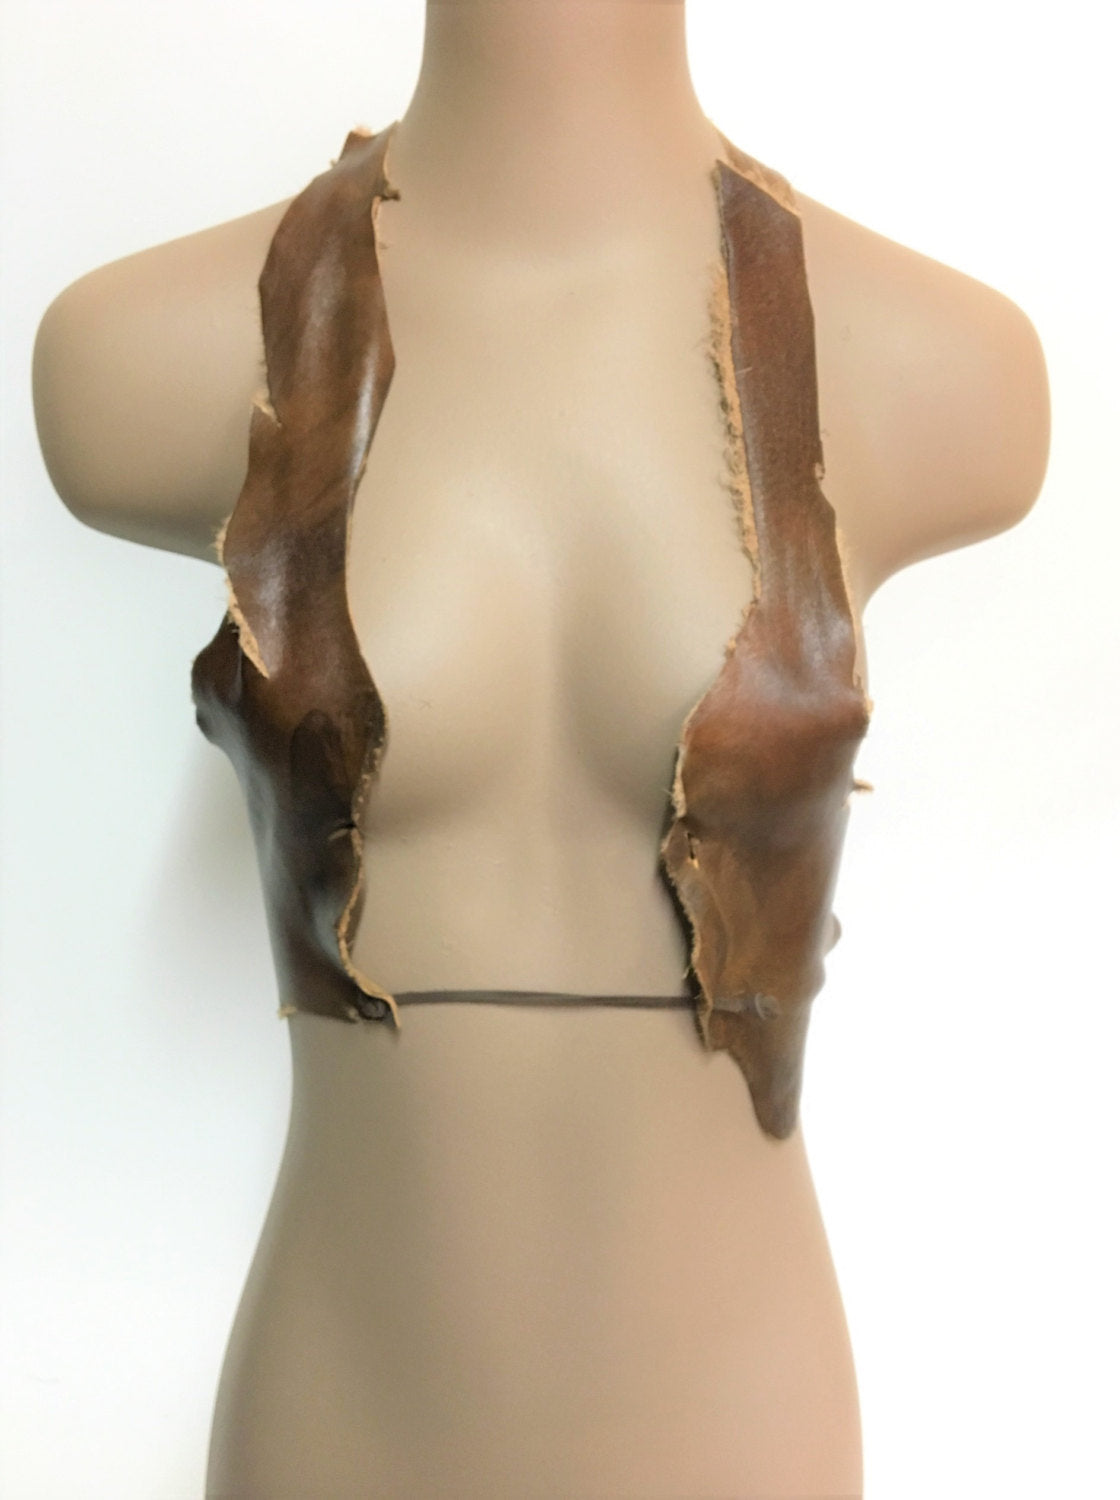 Torn Leather Top - burningbabeclothingco